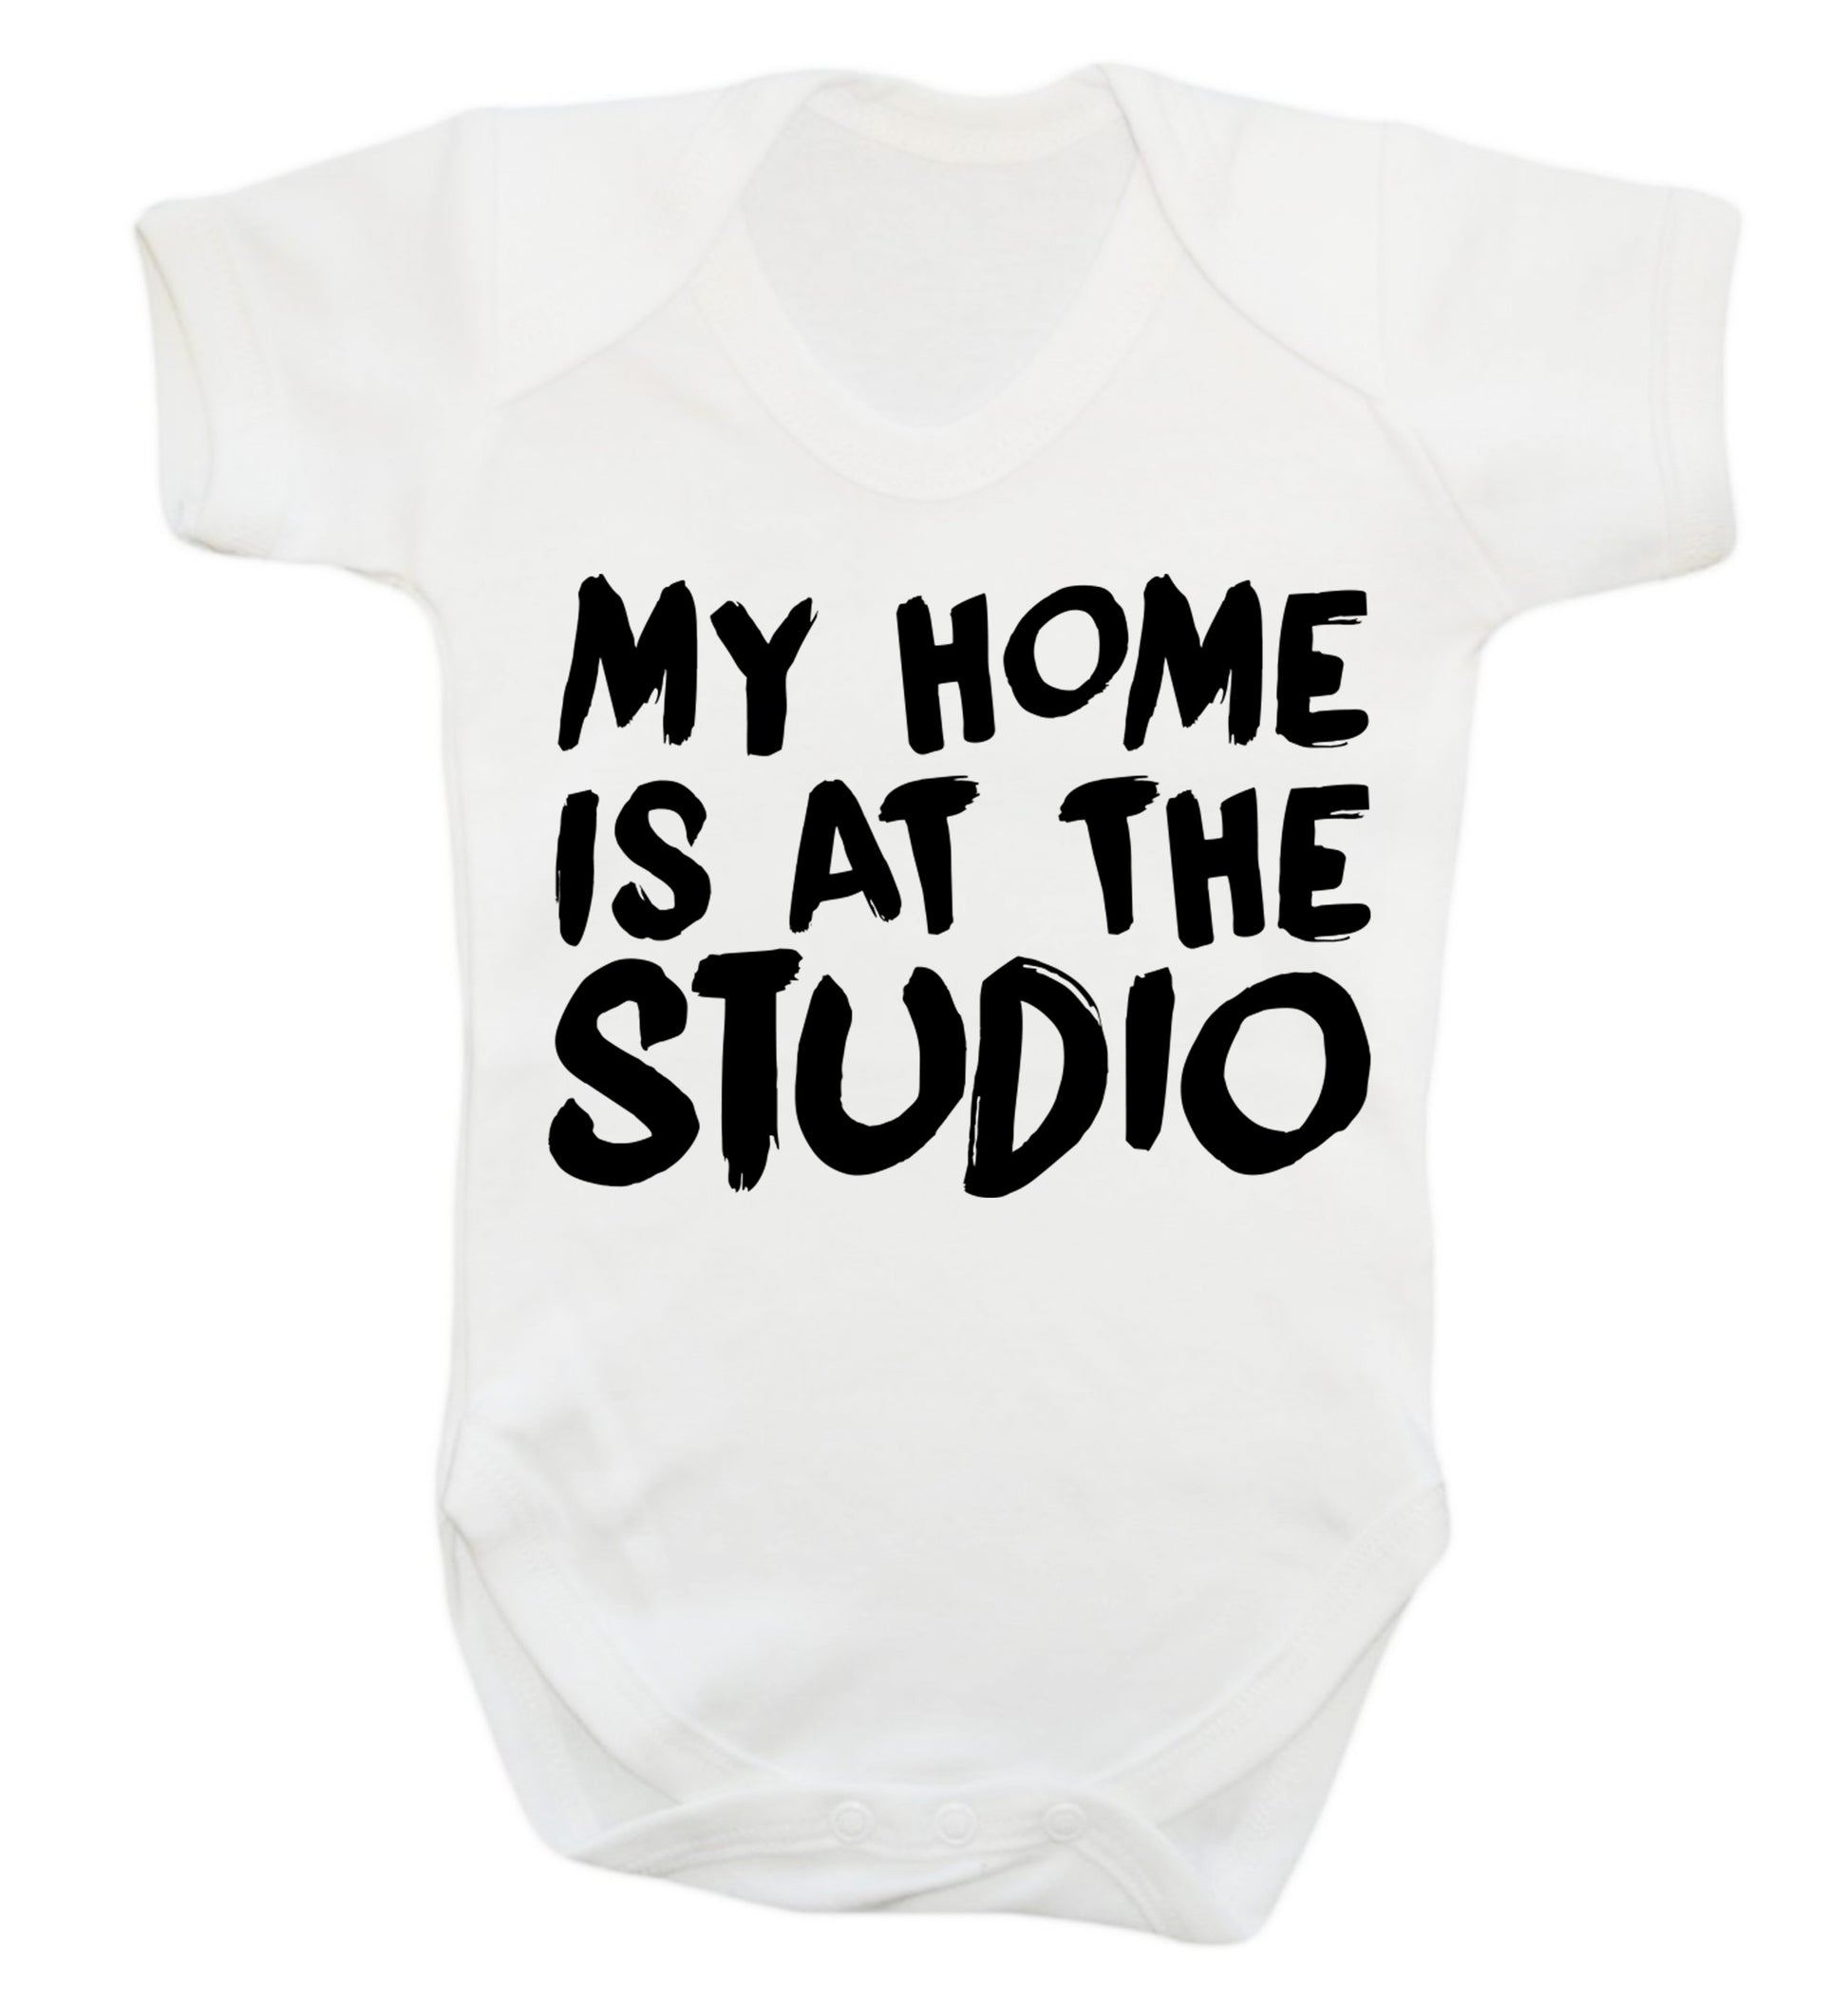 My home is at the studio Baby Vest white 18-24 months